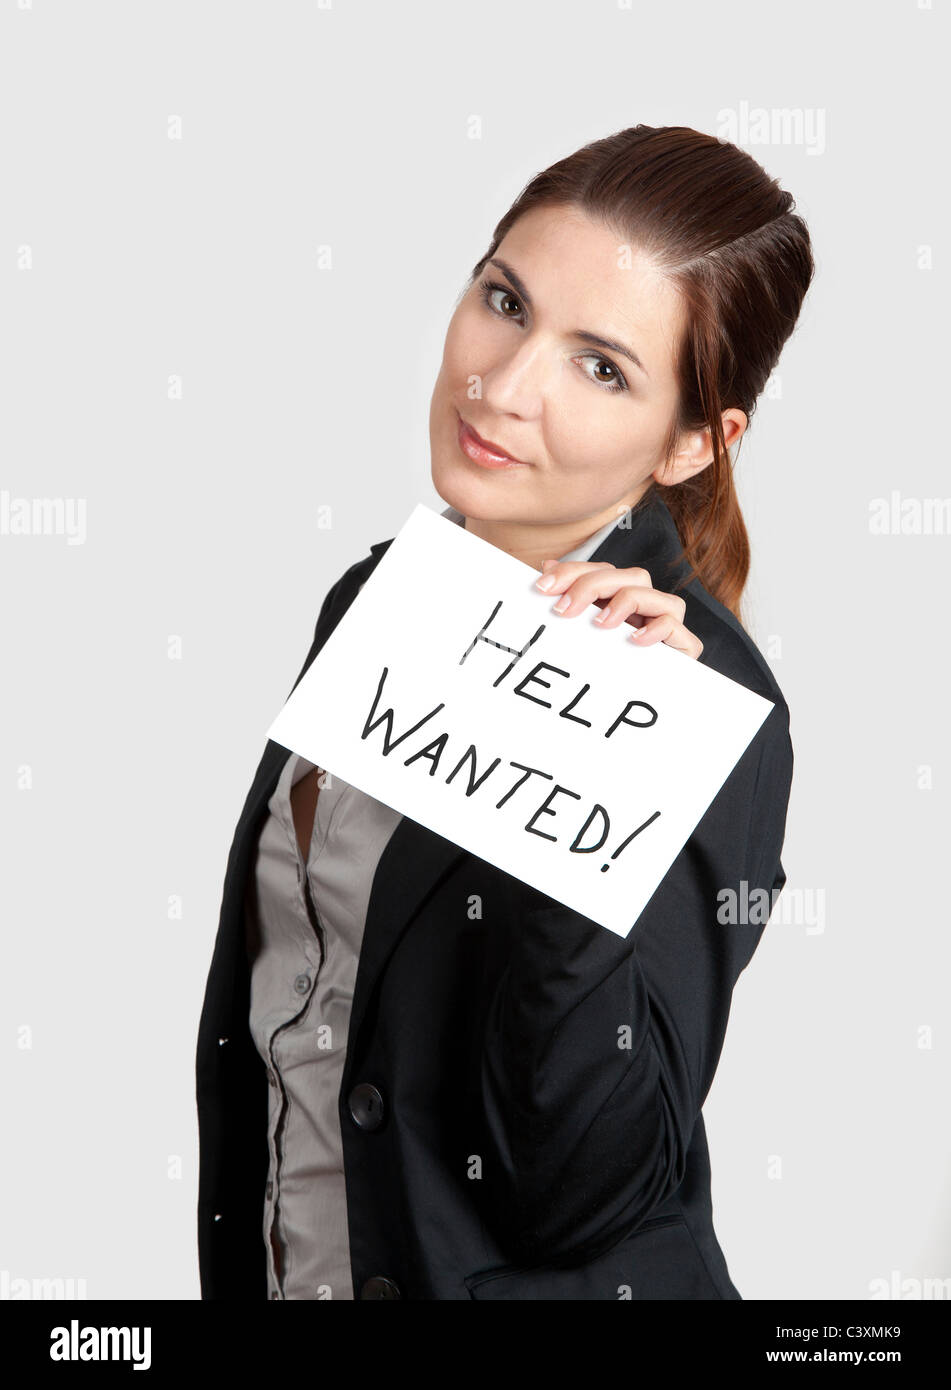 Business woman asking for help holding a cardboard with the text message 'Help Wanted' Stock Photo